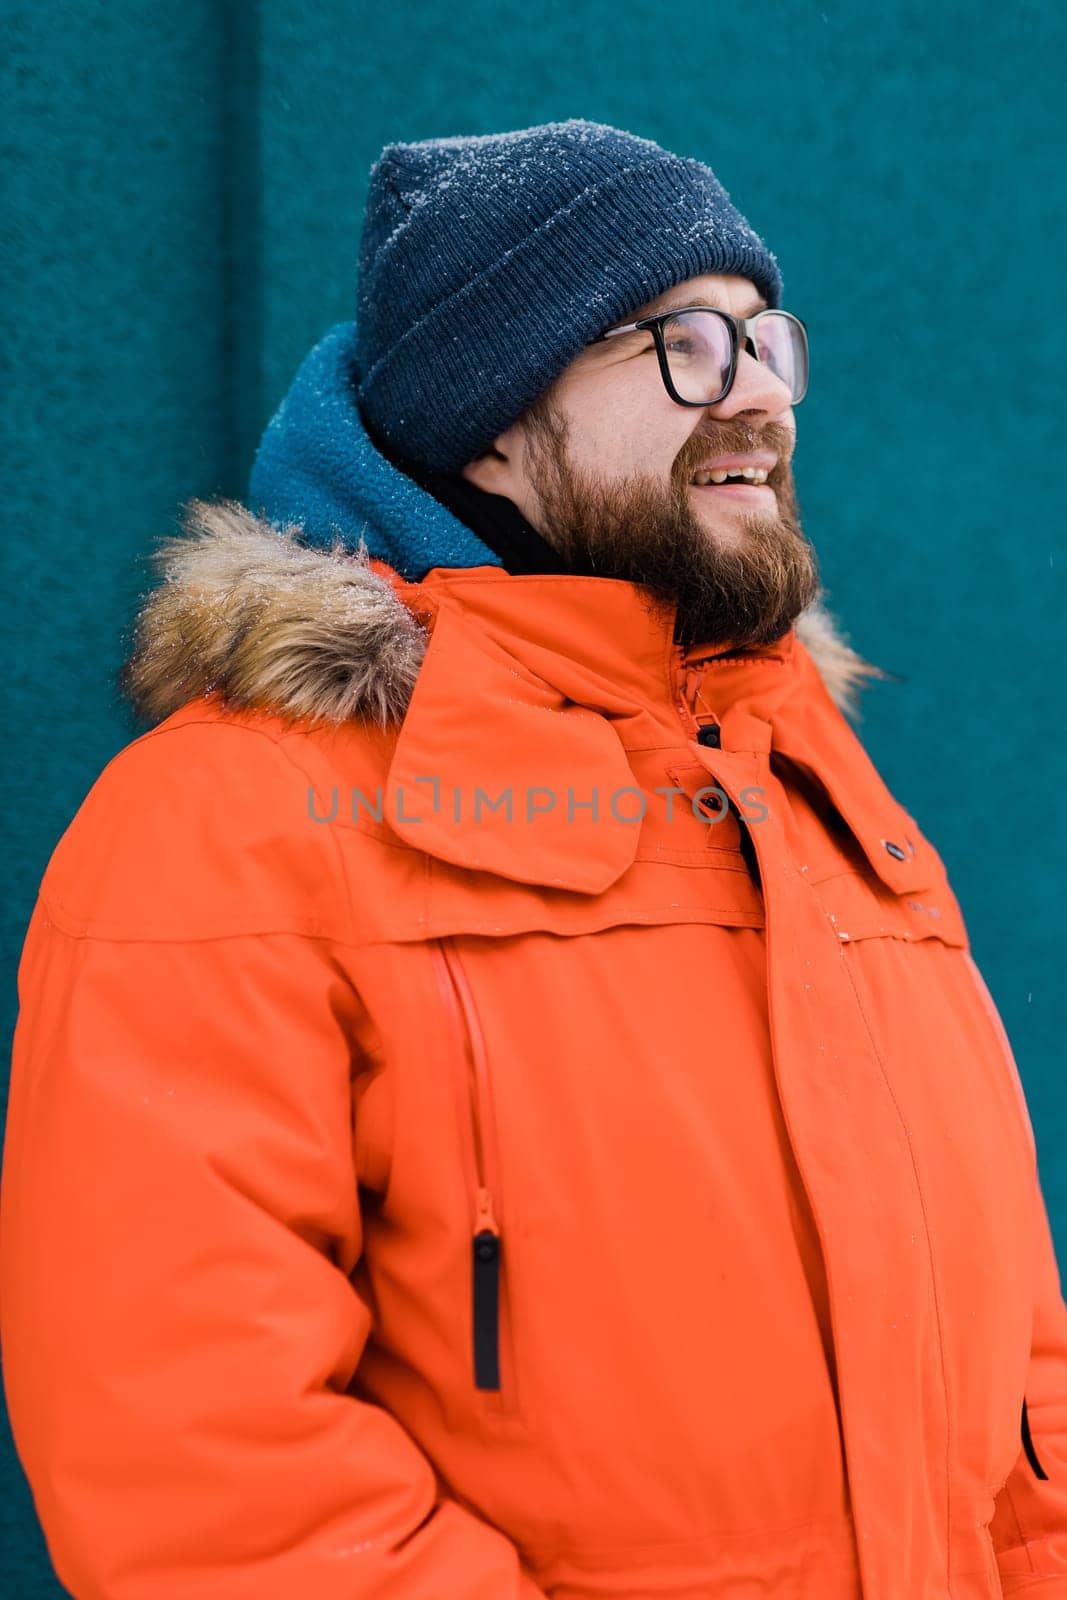 Portrait handsome eyeglasses young male smiling bearded stands on a blue wall background in a bright orange winter jacket with a hood with fur in winter. Millennial generation and Gen Y concept by Satura86